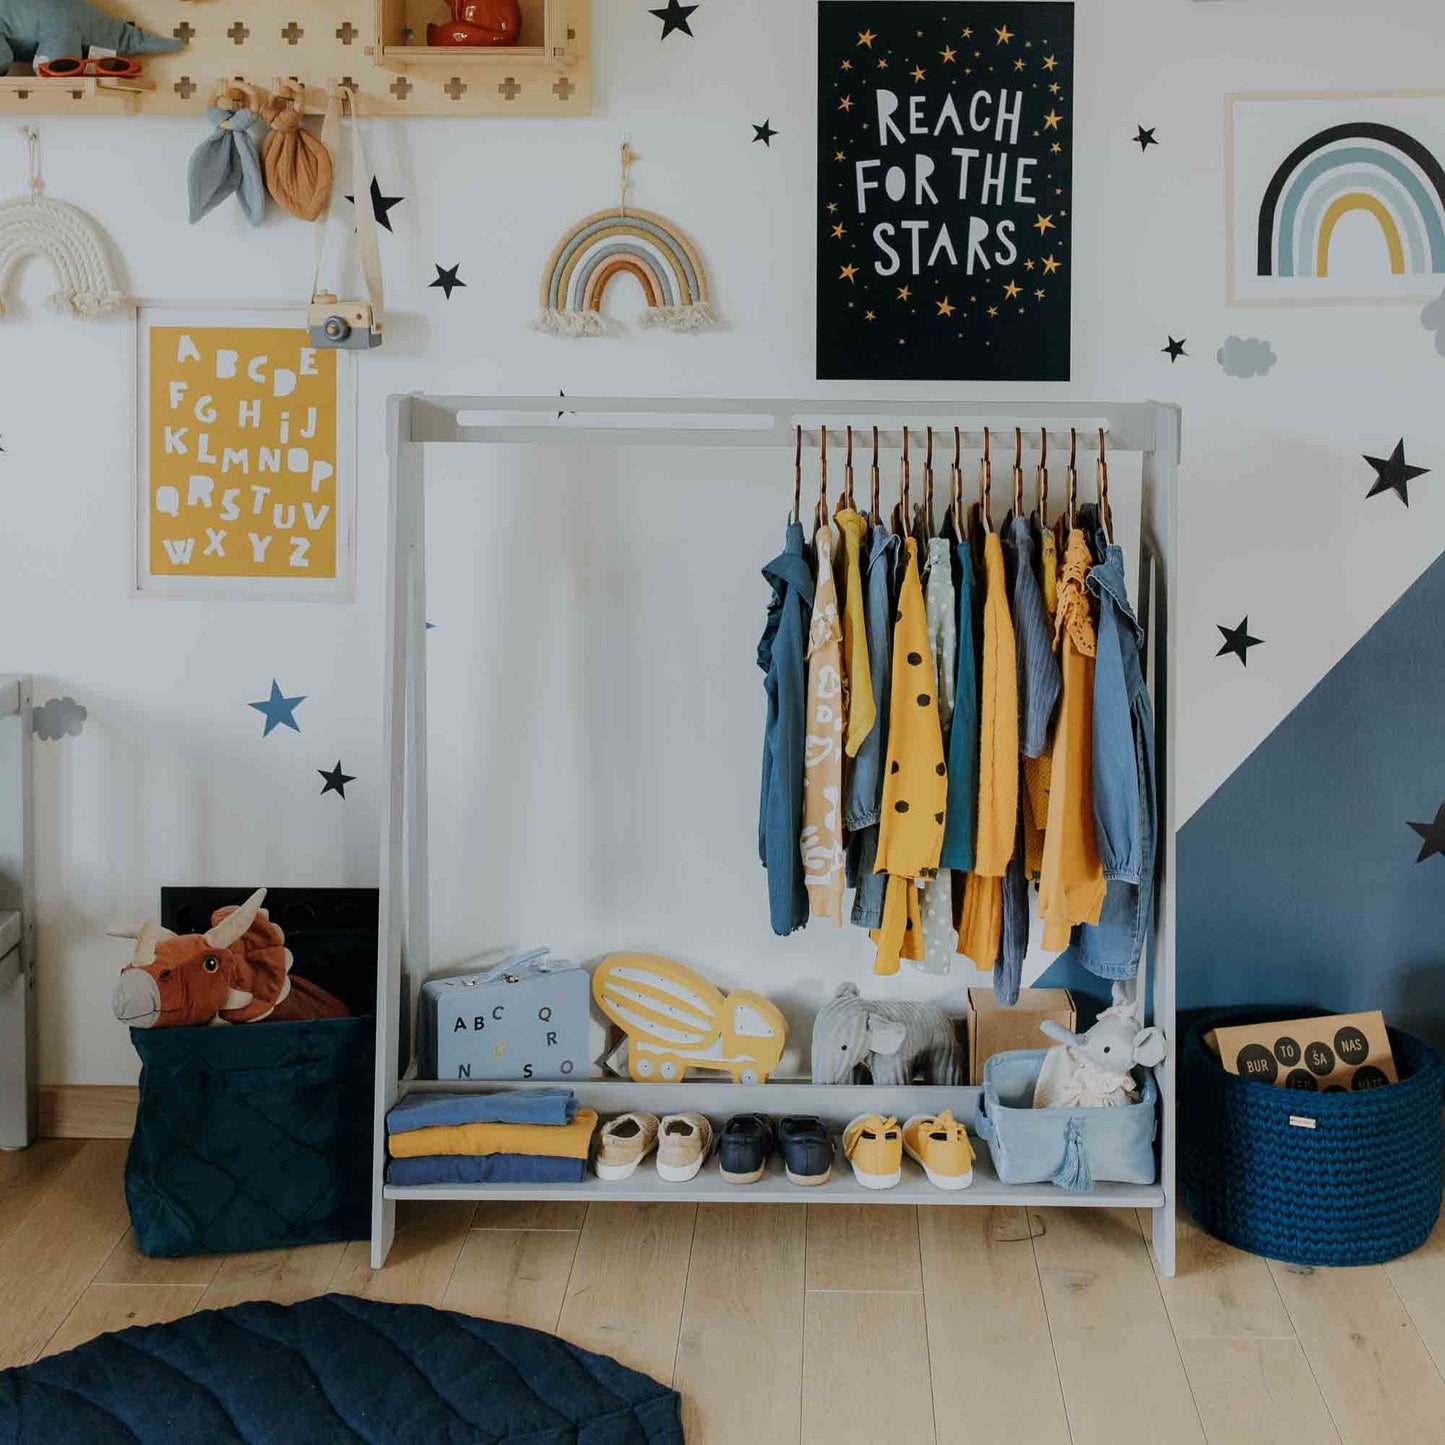 A child's closet beautifully organized with clothes hanging from a kids' clothing rack, a shelf neatly arranged with shoes and toys, and whimsical wall decorations such as stars, rainbows, and a "Reach for the Stars" poster. This enchanting space also includes a wooden kids' clothing rack that is perfect for dress-up storage.